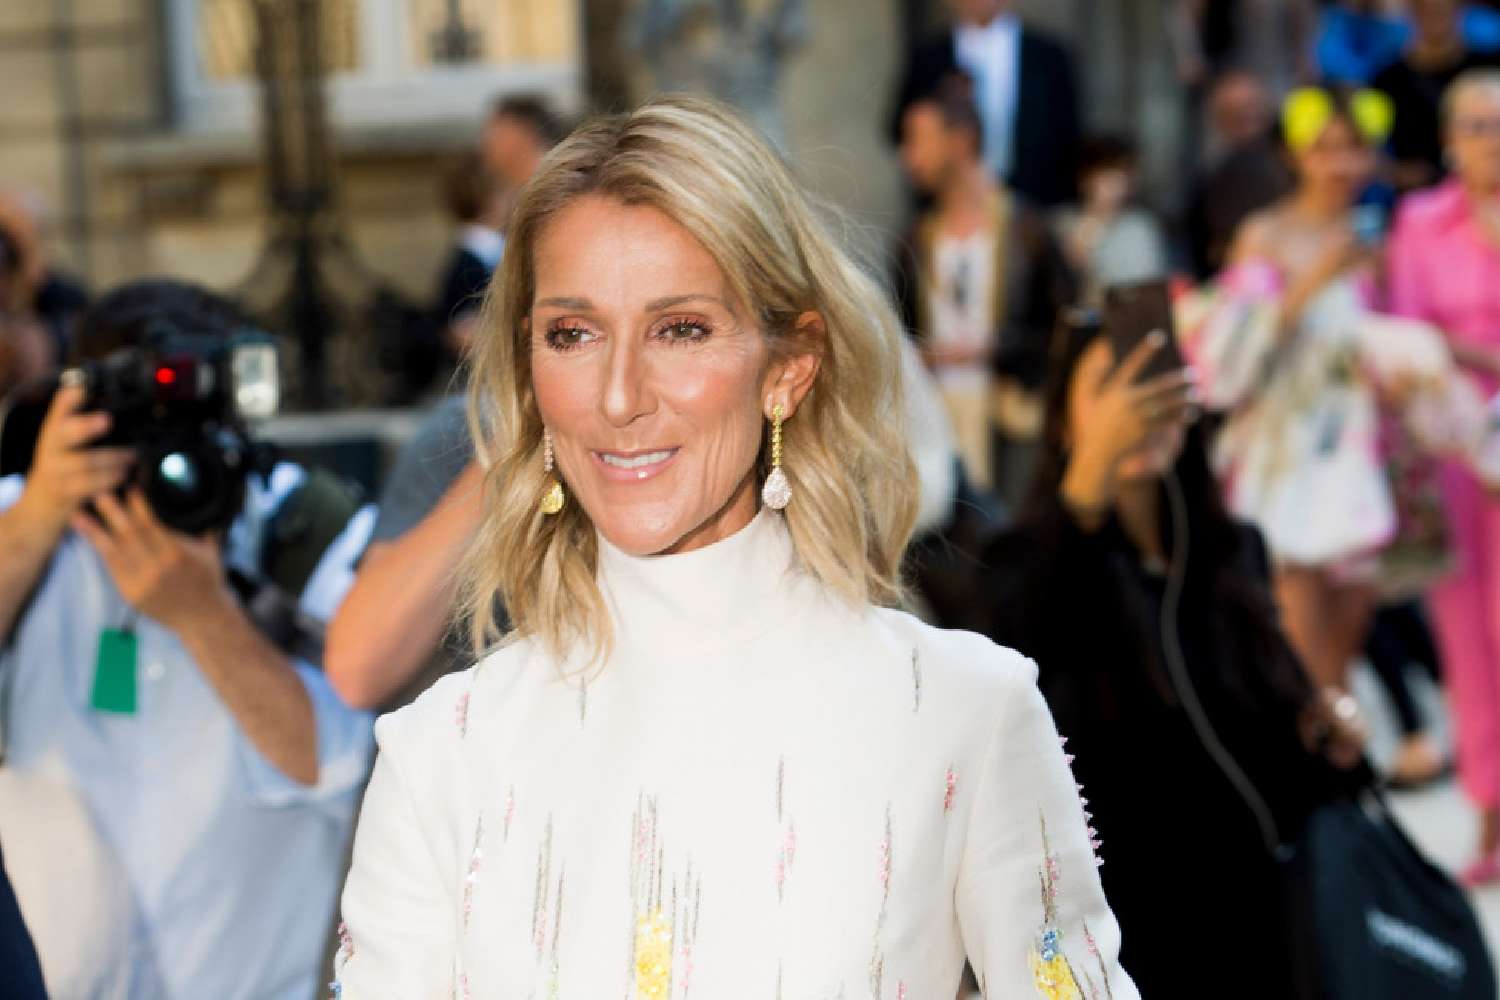 Celine Dion 2023 world tour cancelled: Here's everything we know ...